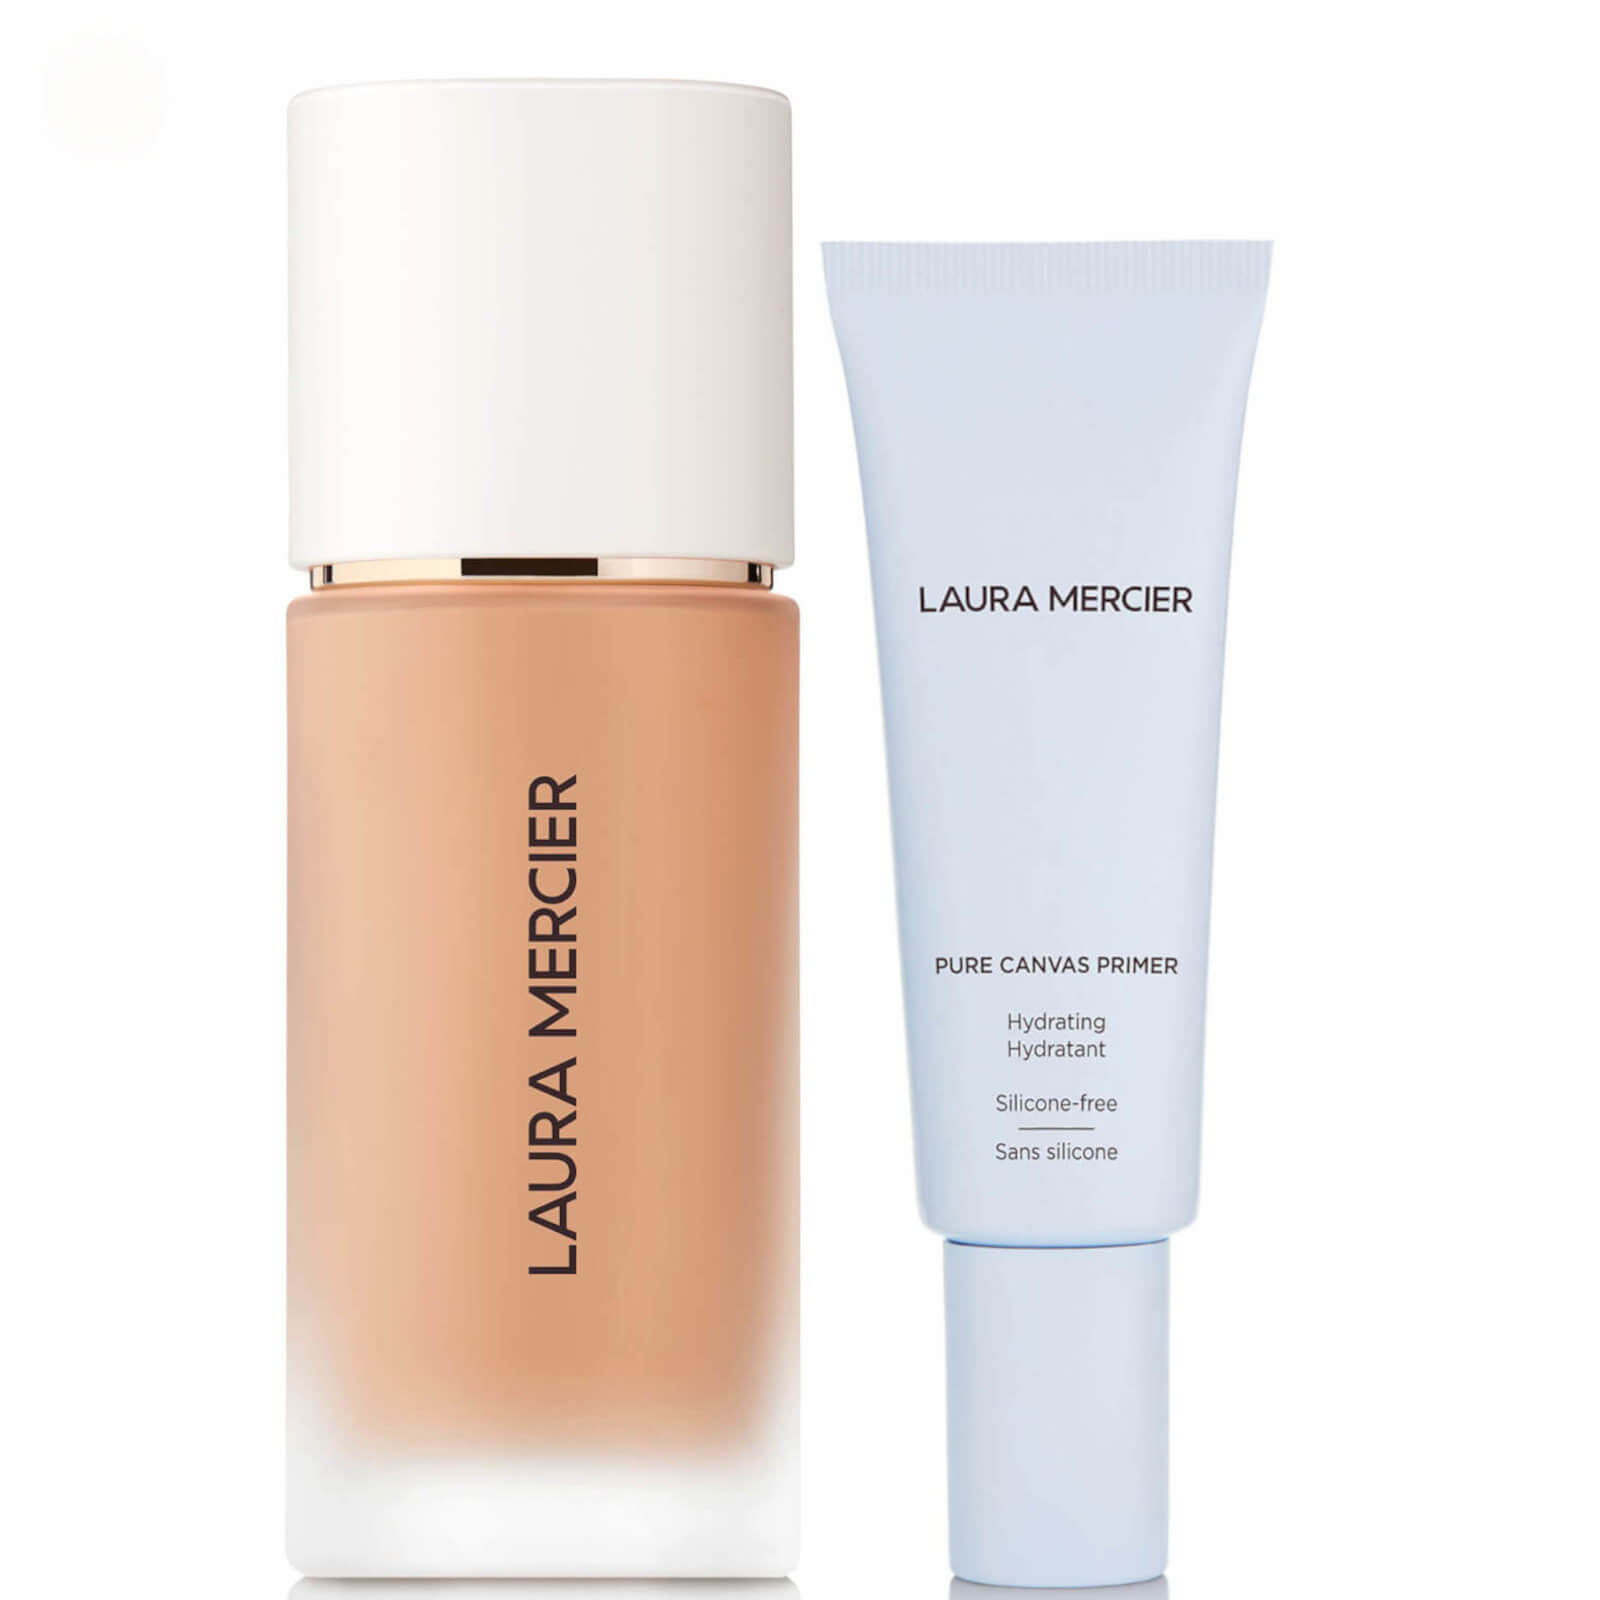 Laura Mercier Real Flawless Foundation and Pure Canvas Hydrating Primer Bundle (Various Shades) - 4N2 Tea